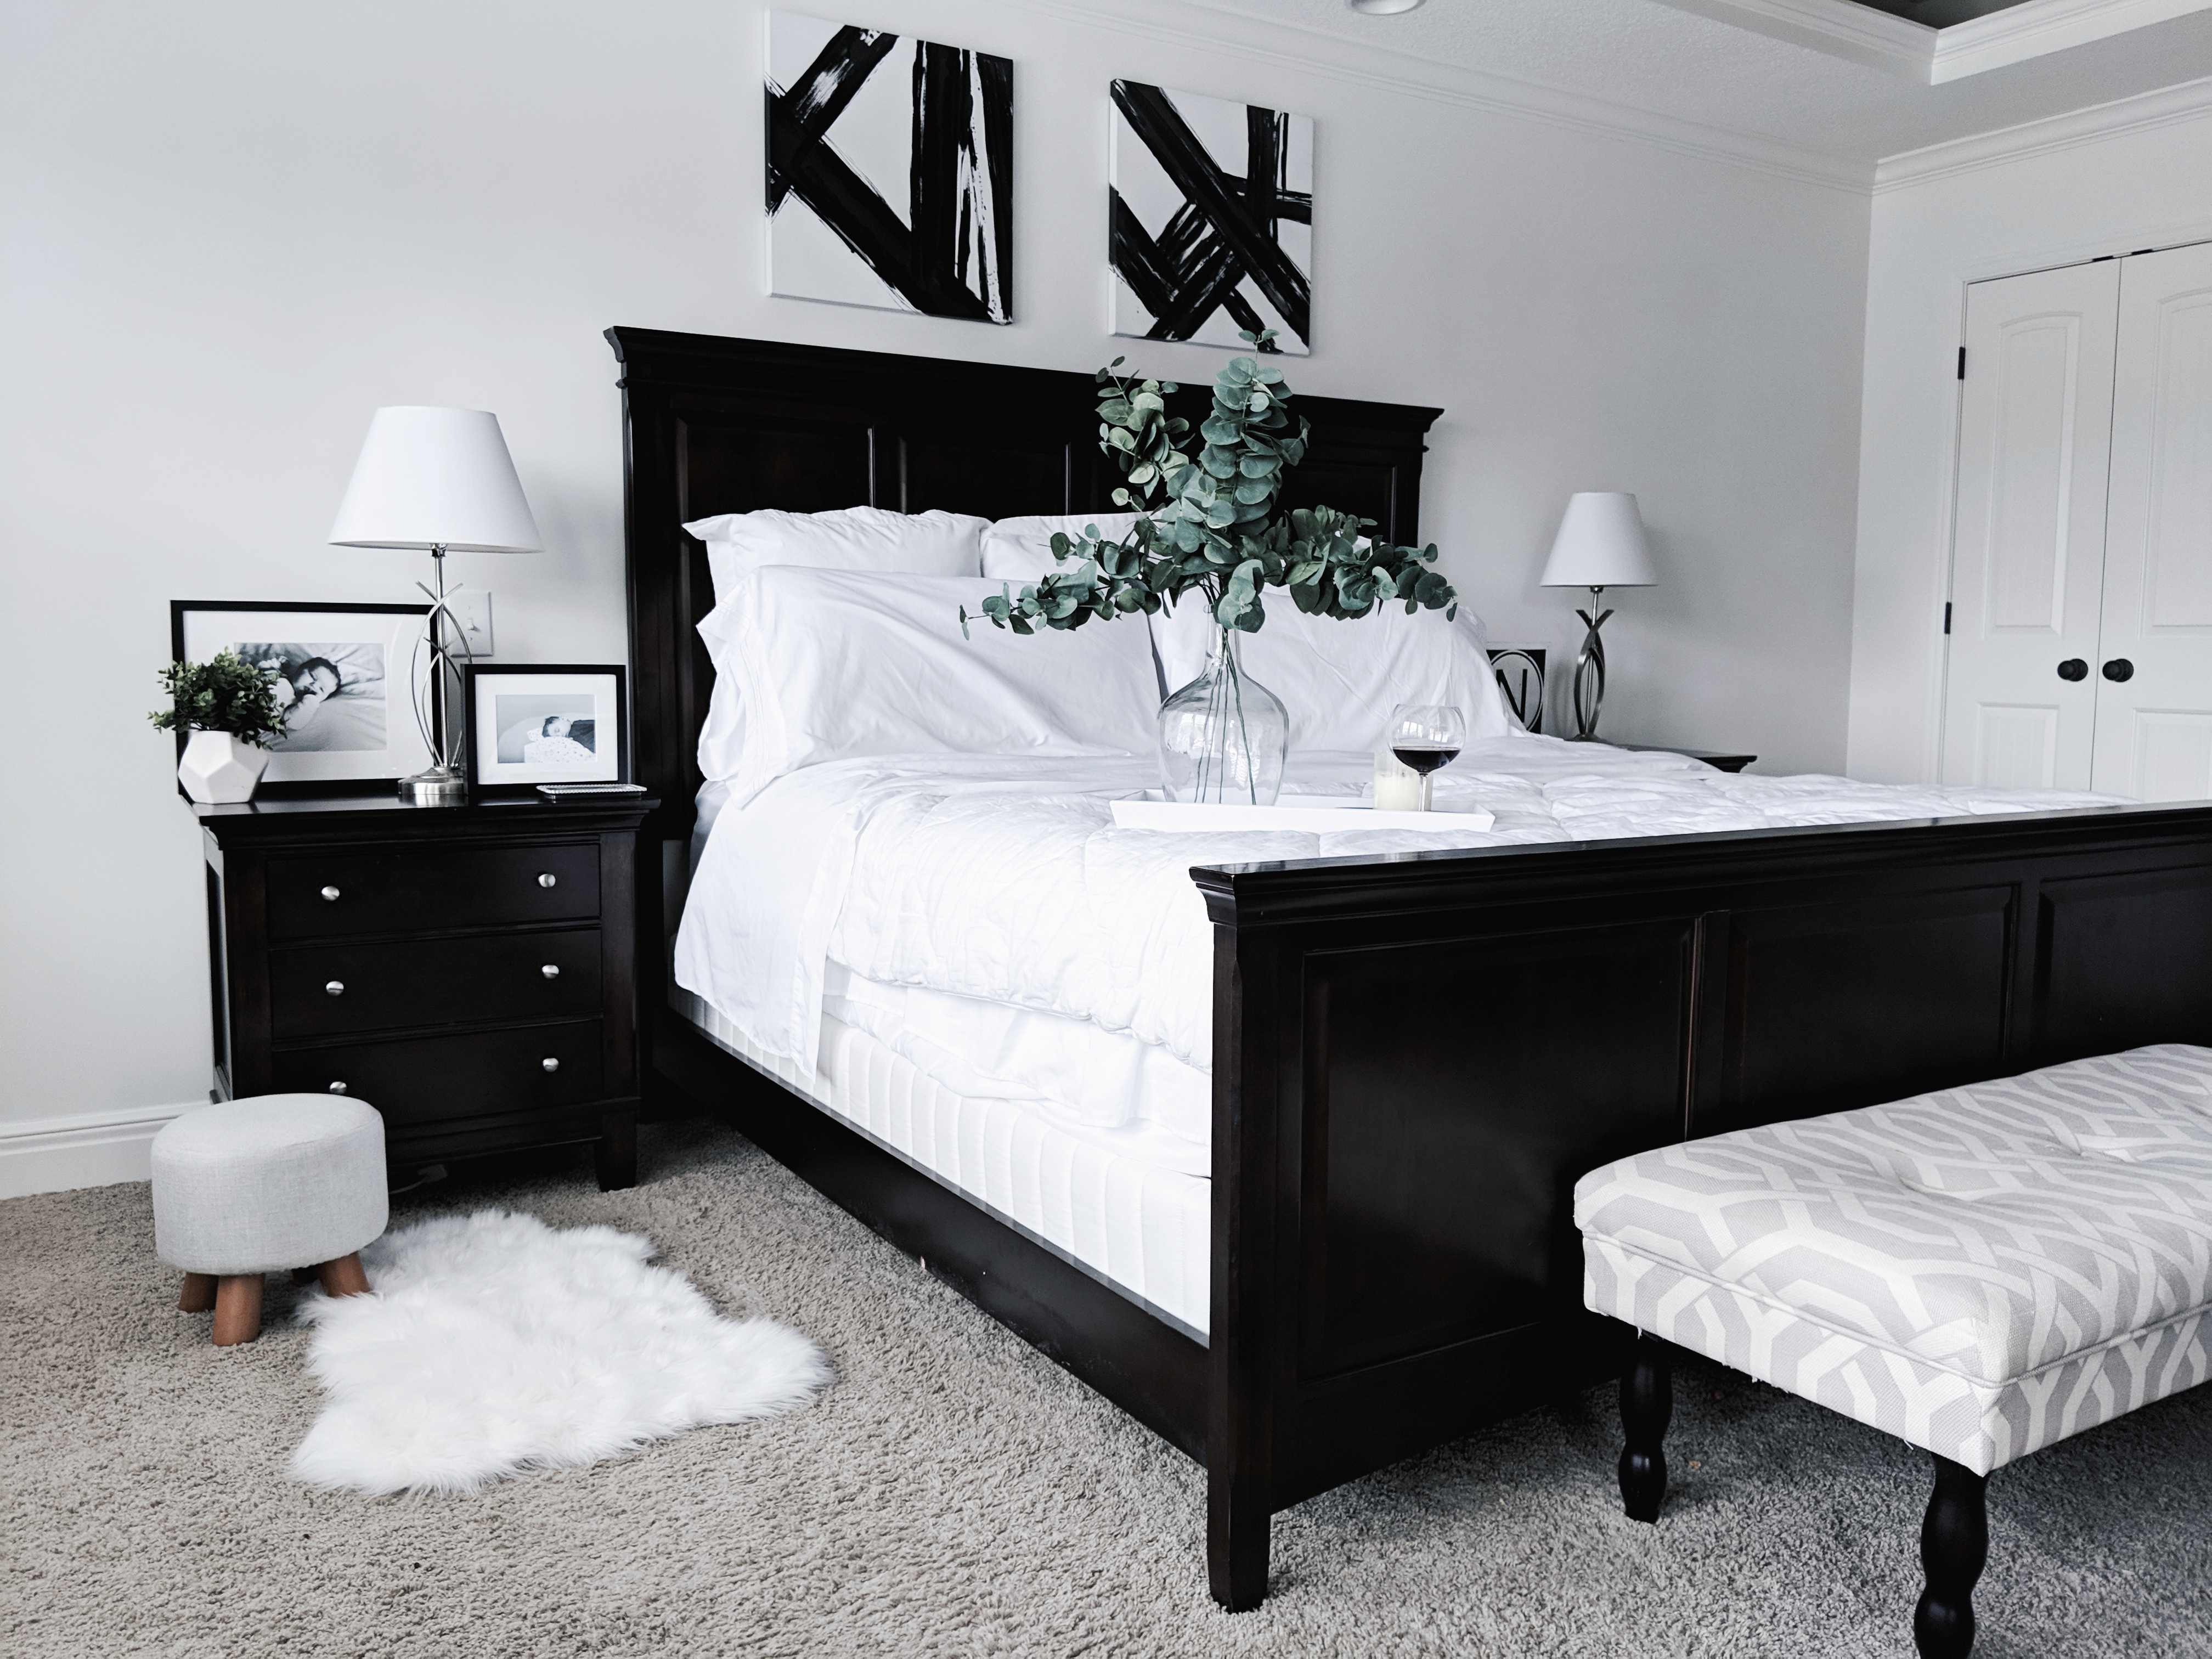 A Modern Black And White Bedroom